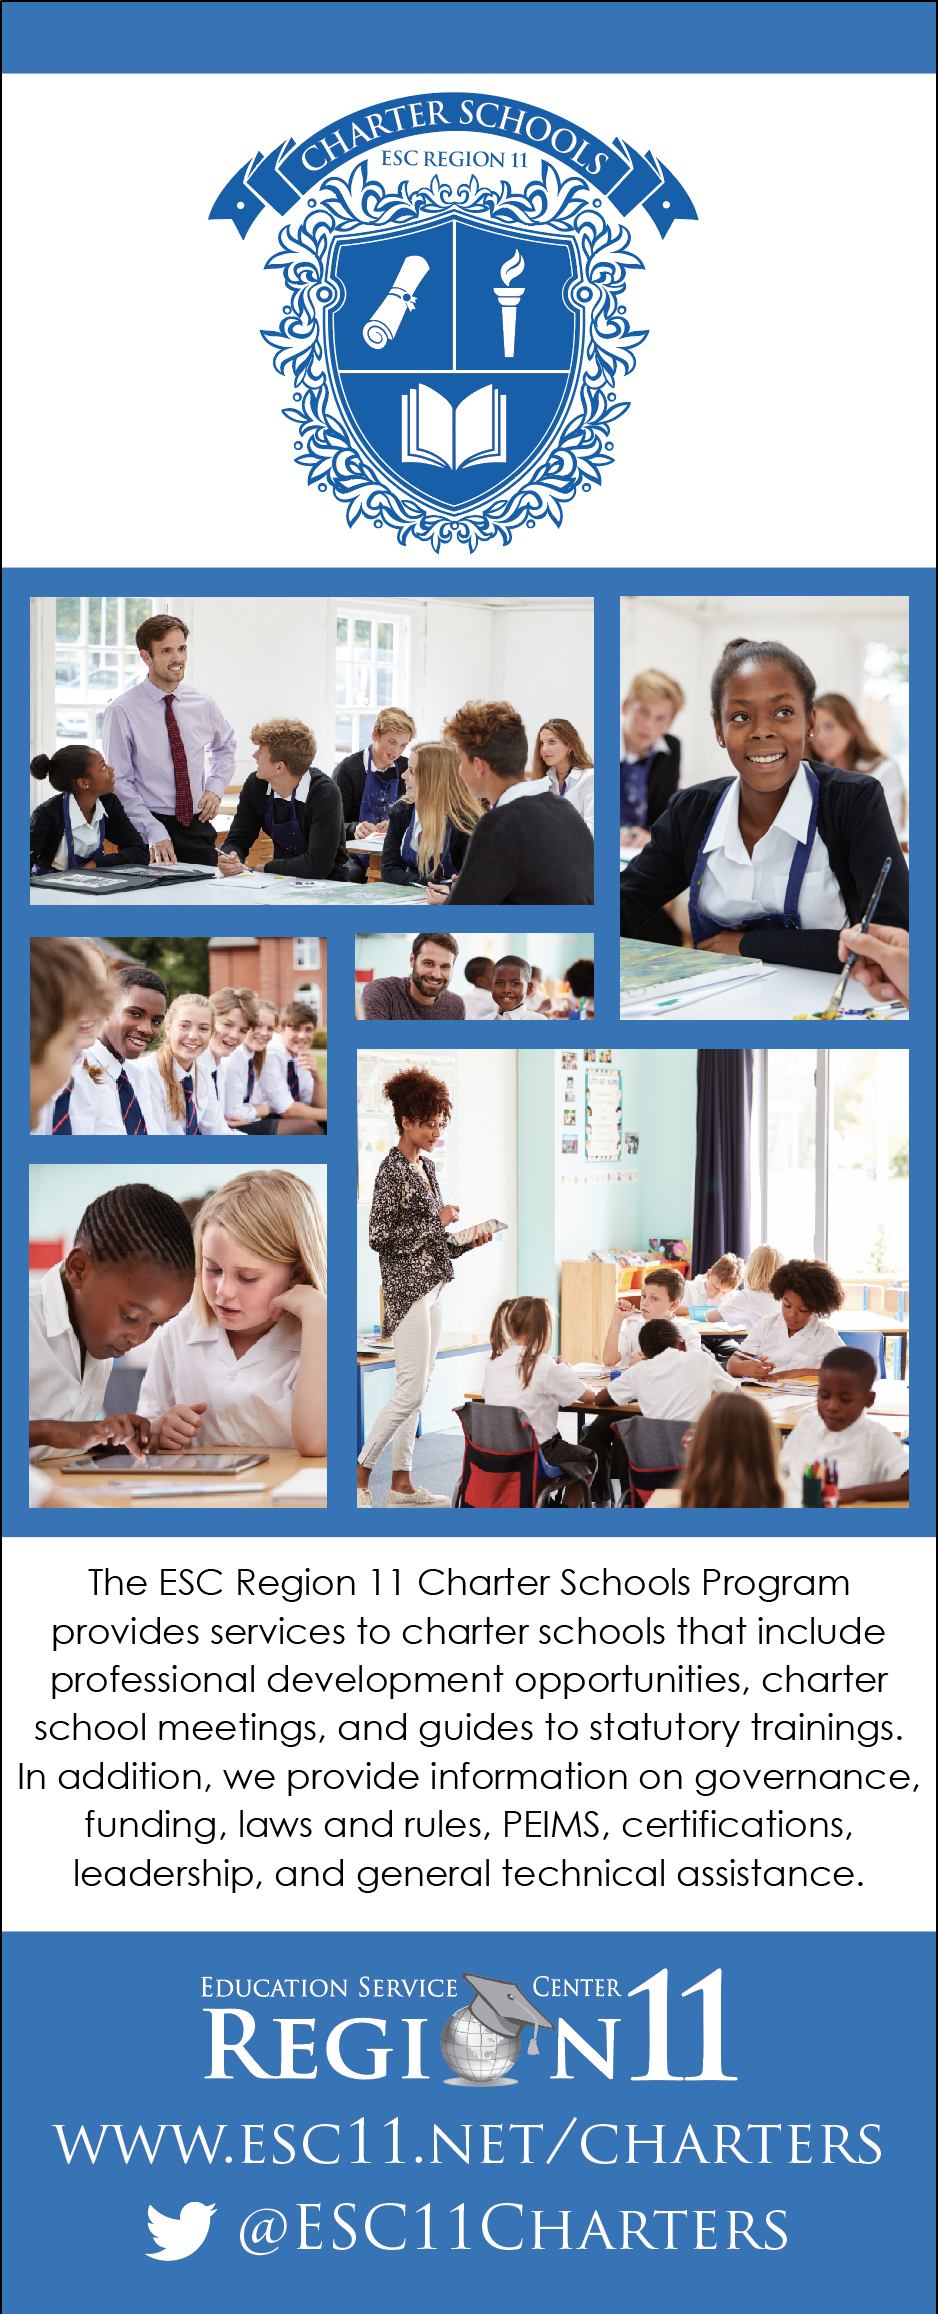 ESC Region 11 Charter Schools Program Provides PD, meetings, and guides to statutory trainings.